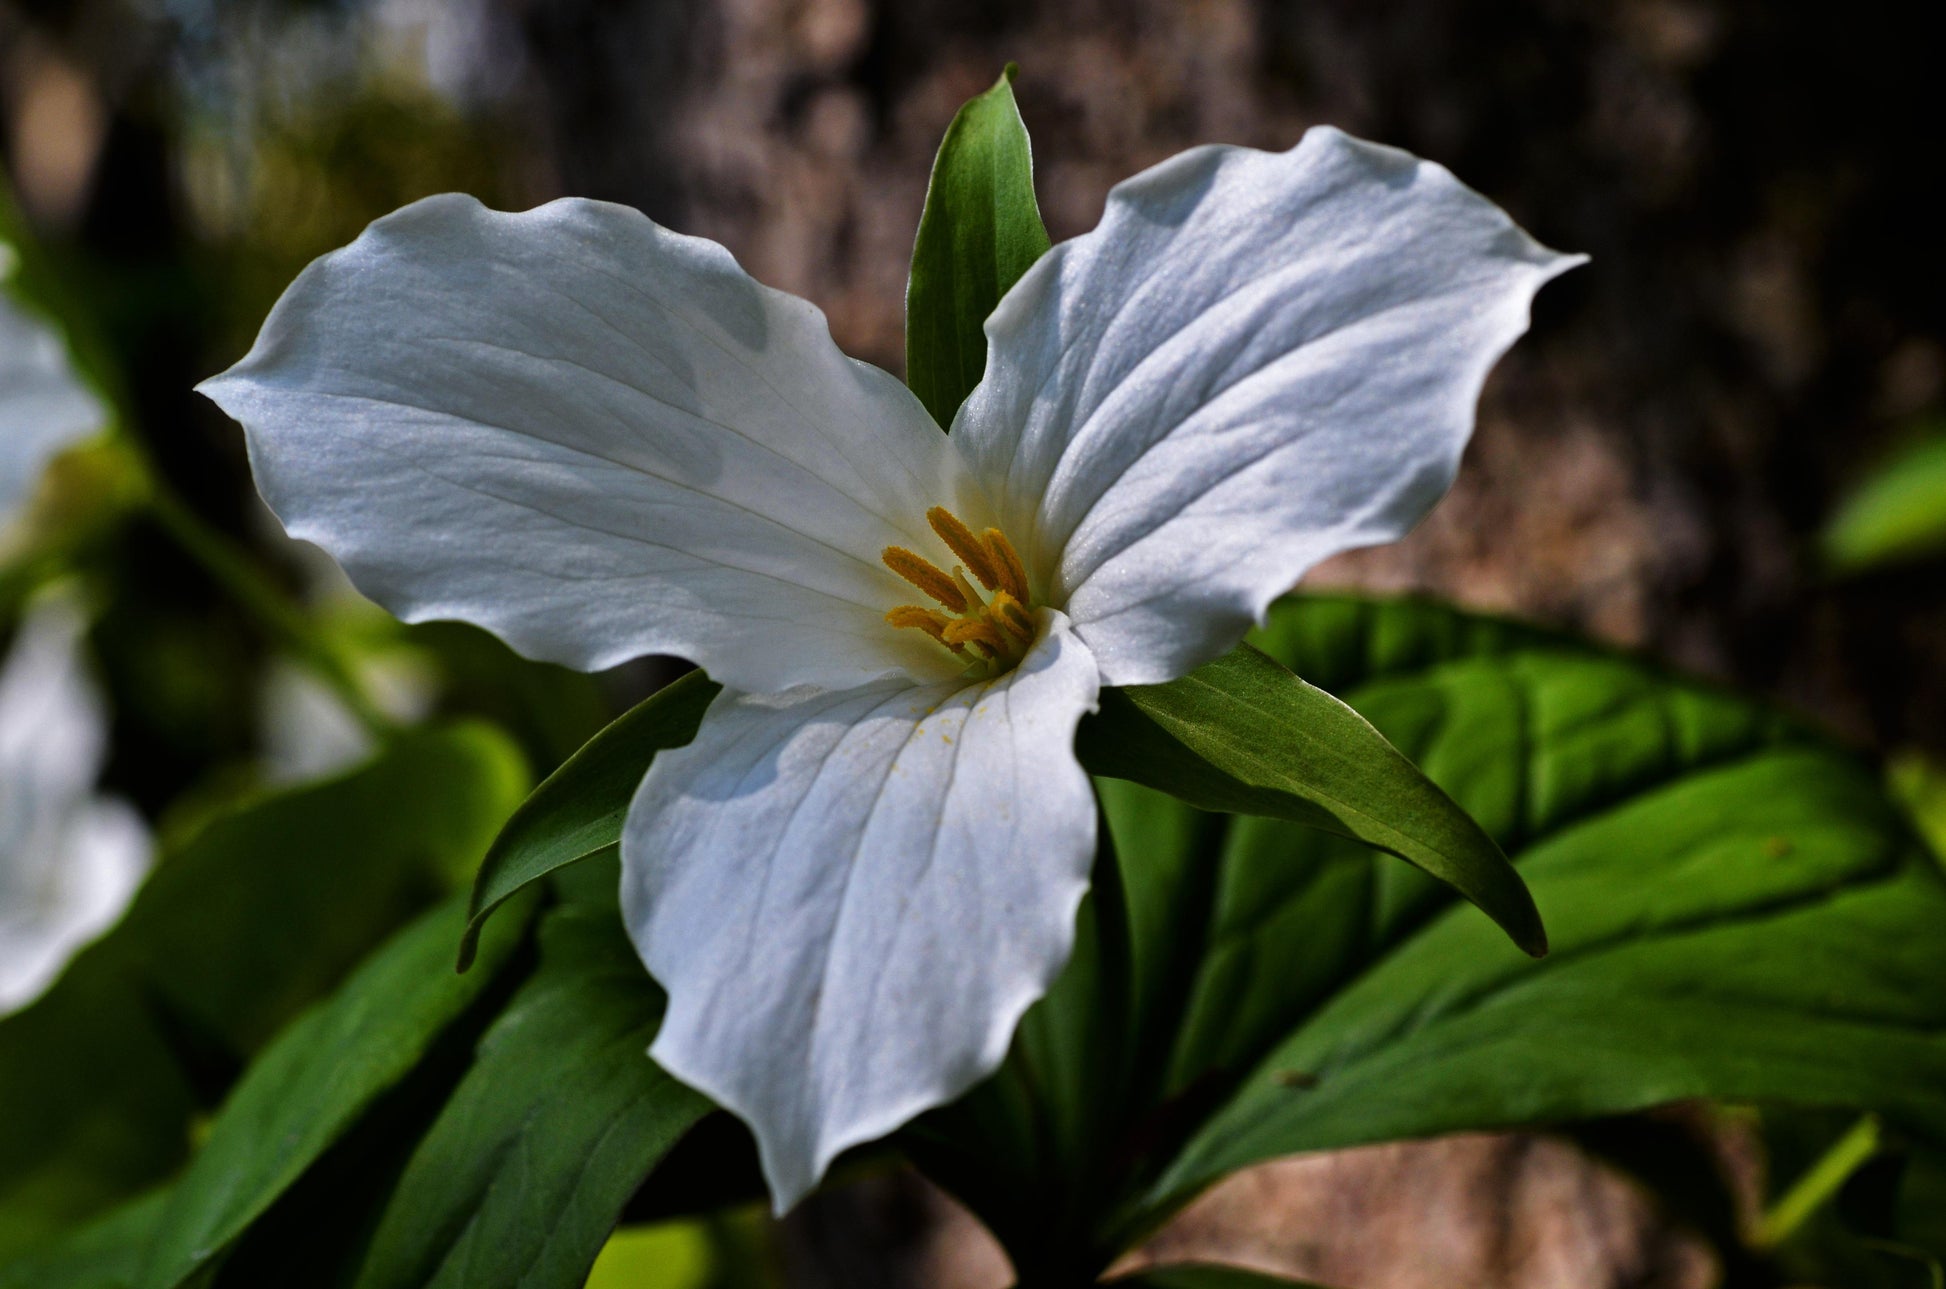 A gift card design with a white trillium flower.